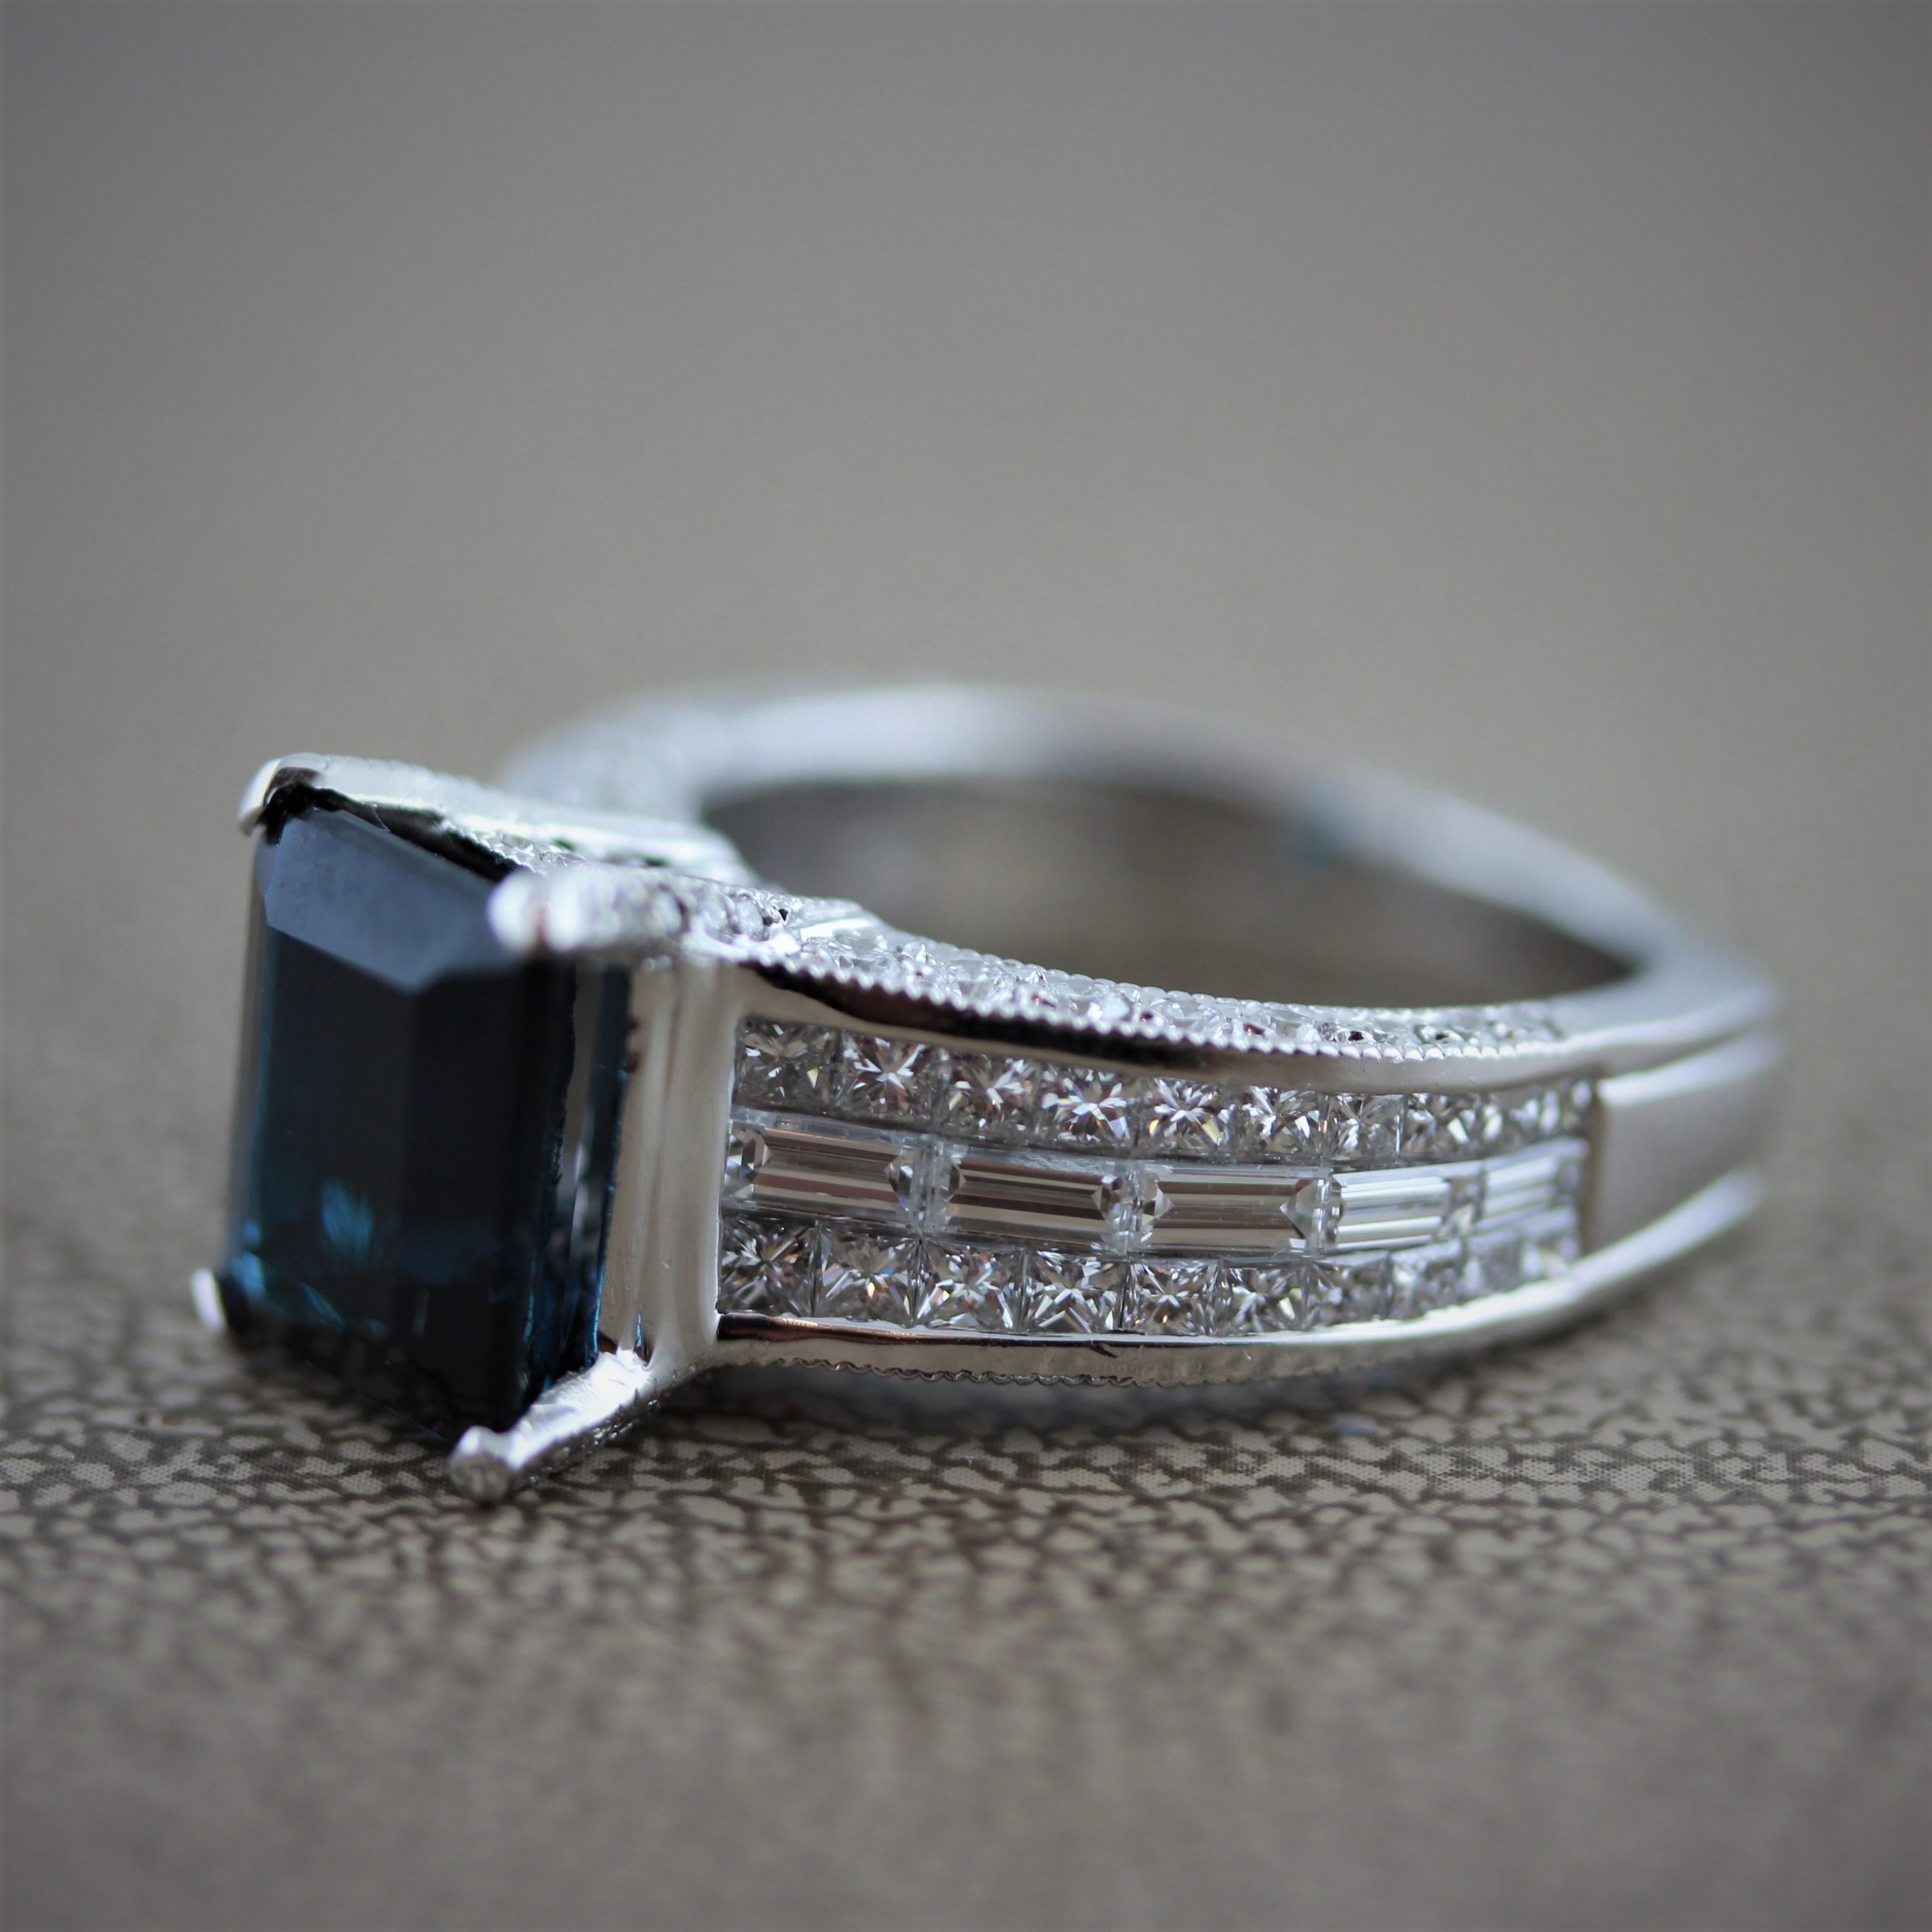 A rare blue colored tourmaline called “Indicolite” in the trade is featured in exquisite ring. It weighs 3.86 carats and is cut as an emerald cut. Adding to the indicolite are 2.52 carats of round brilliant cuts, baguette cuts and princess cut